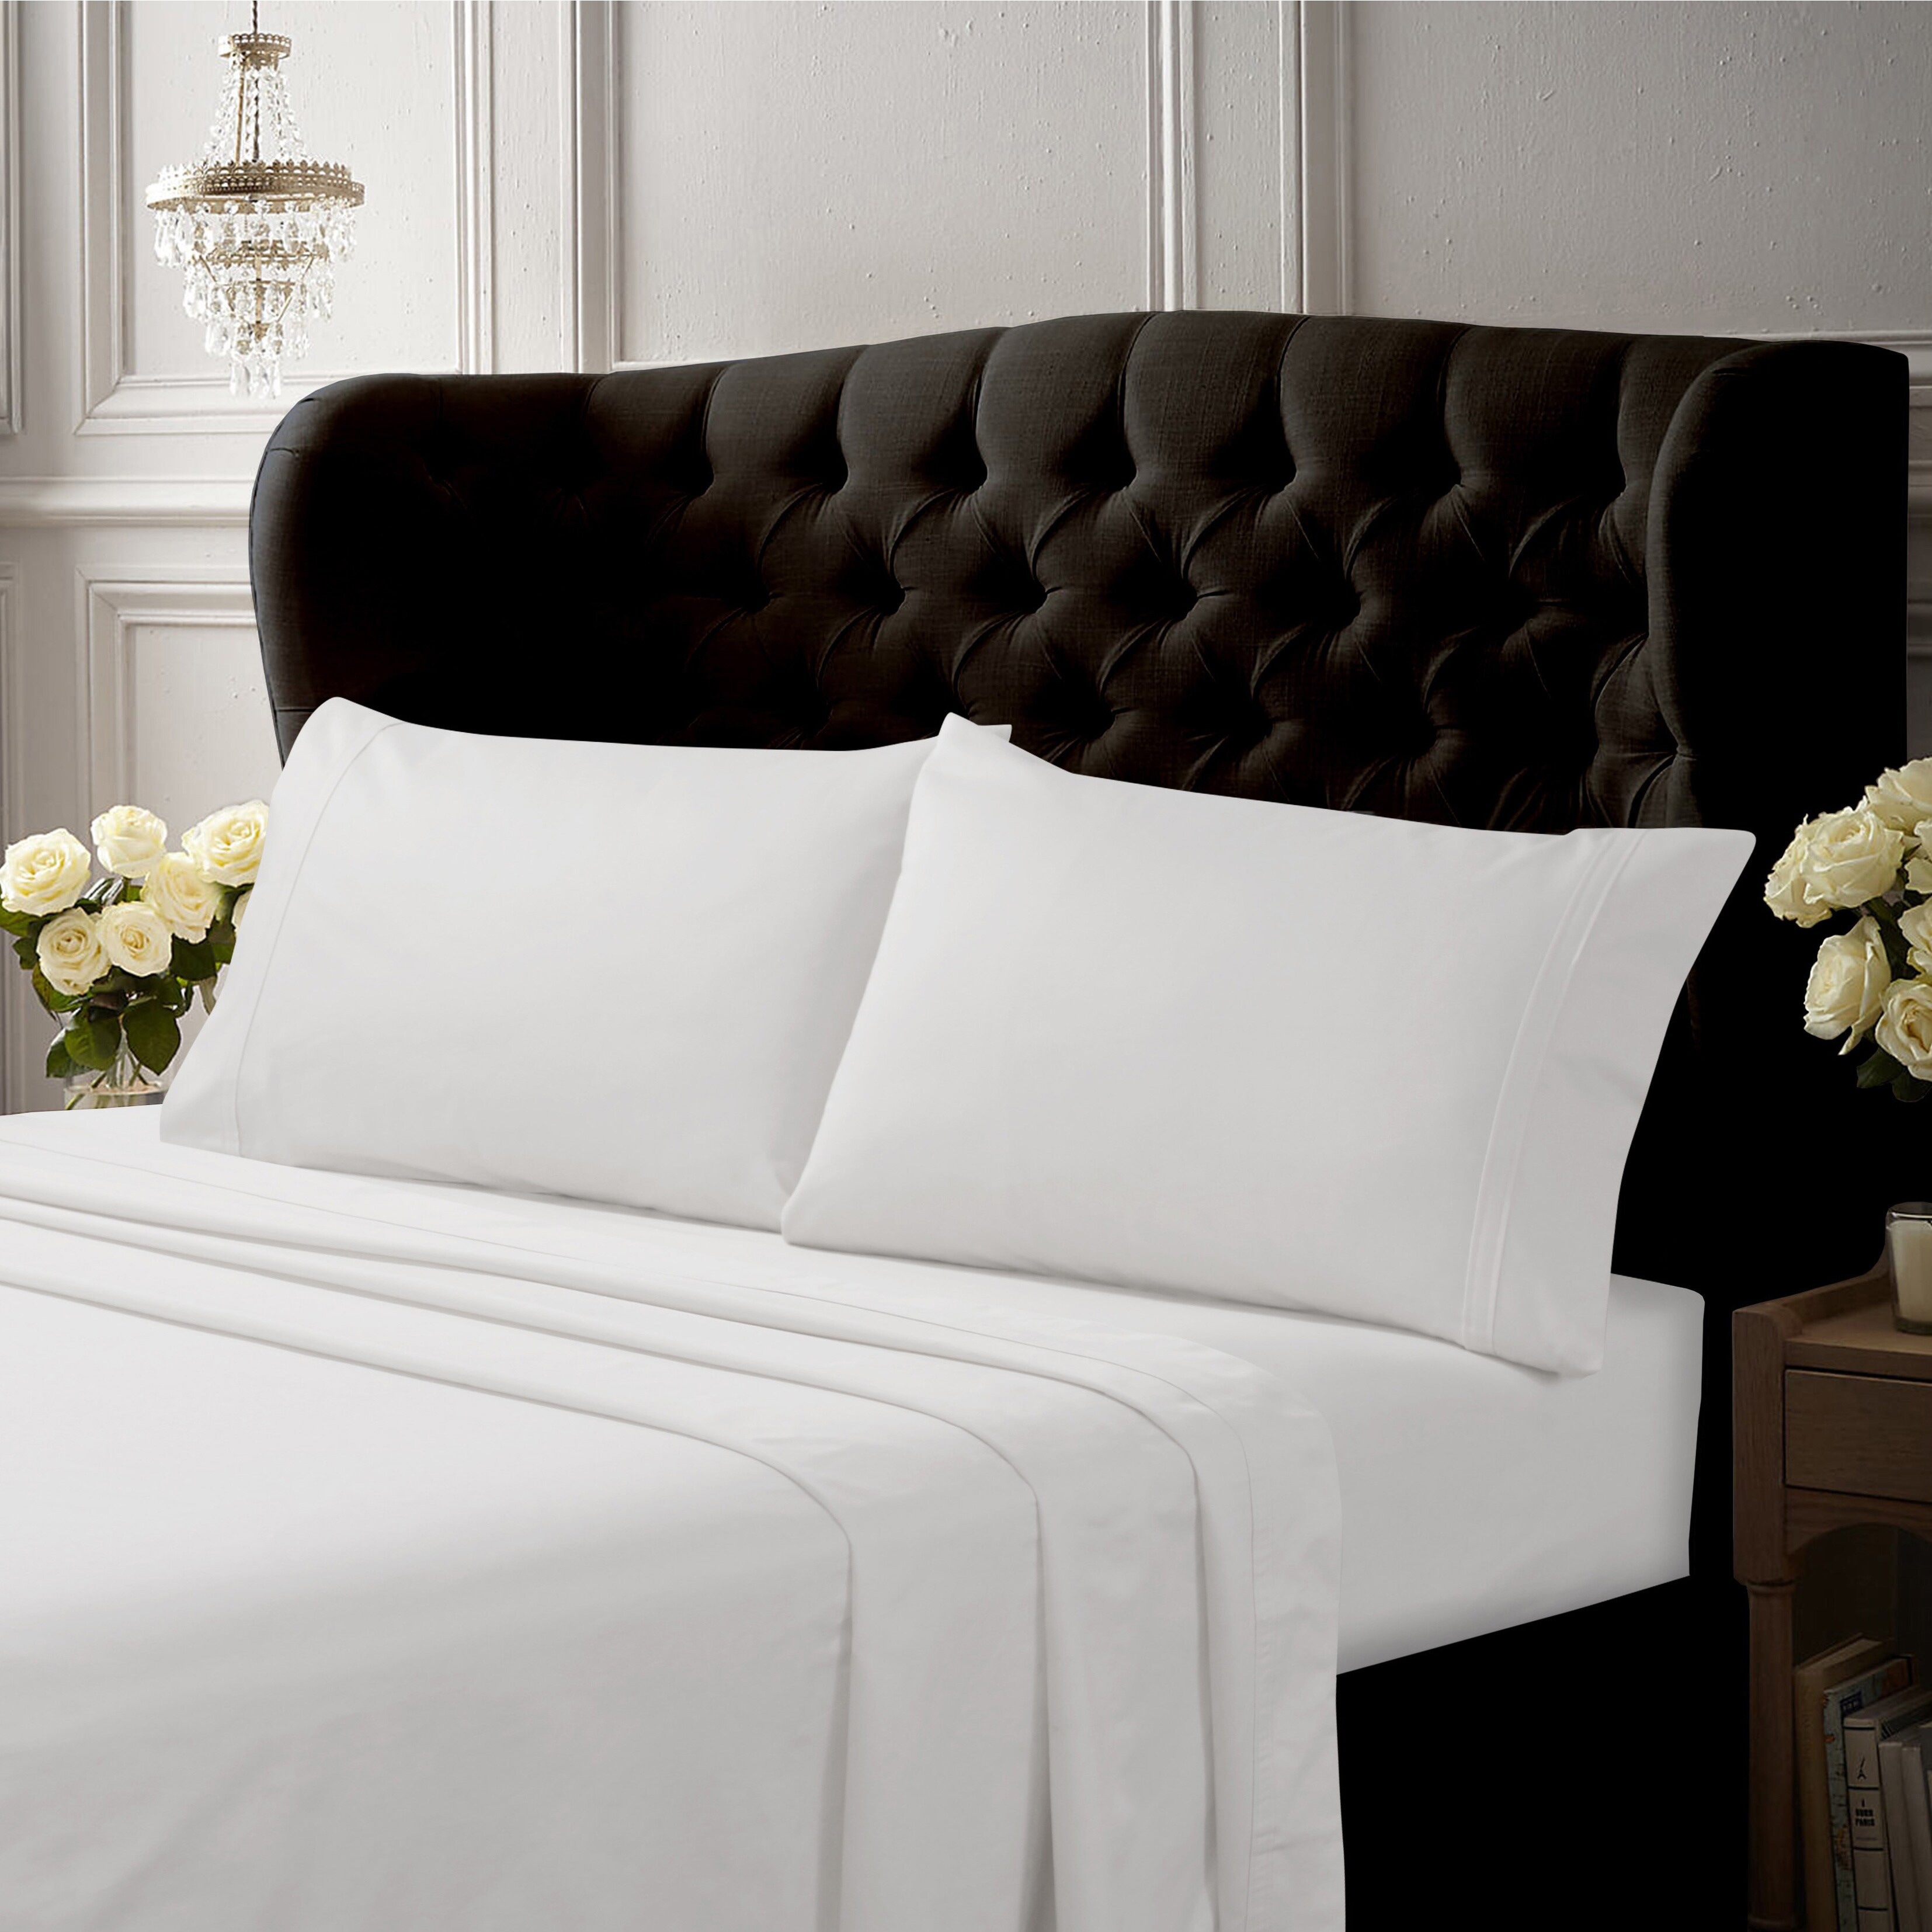 Fabulous Sheet Collection Egyptian Cotton Black Solid Select Item & US Size 